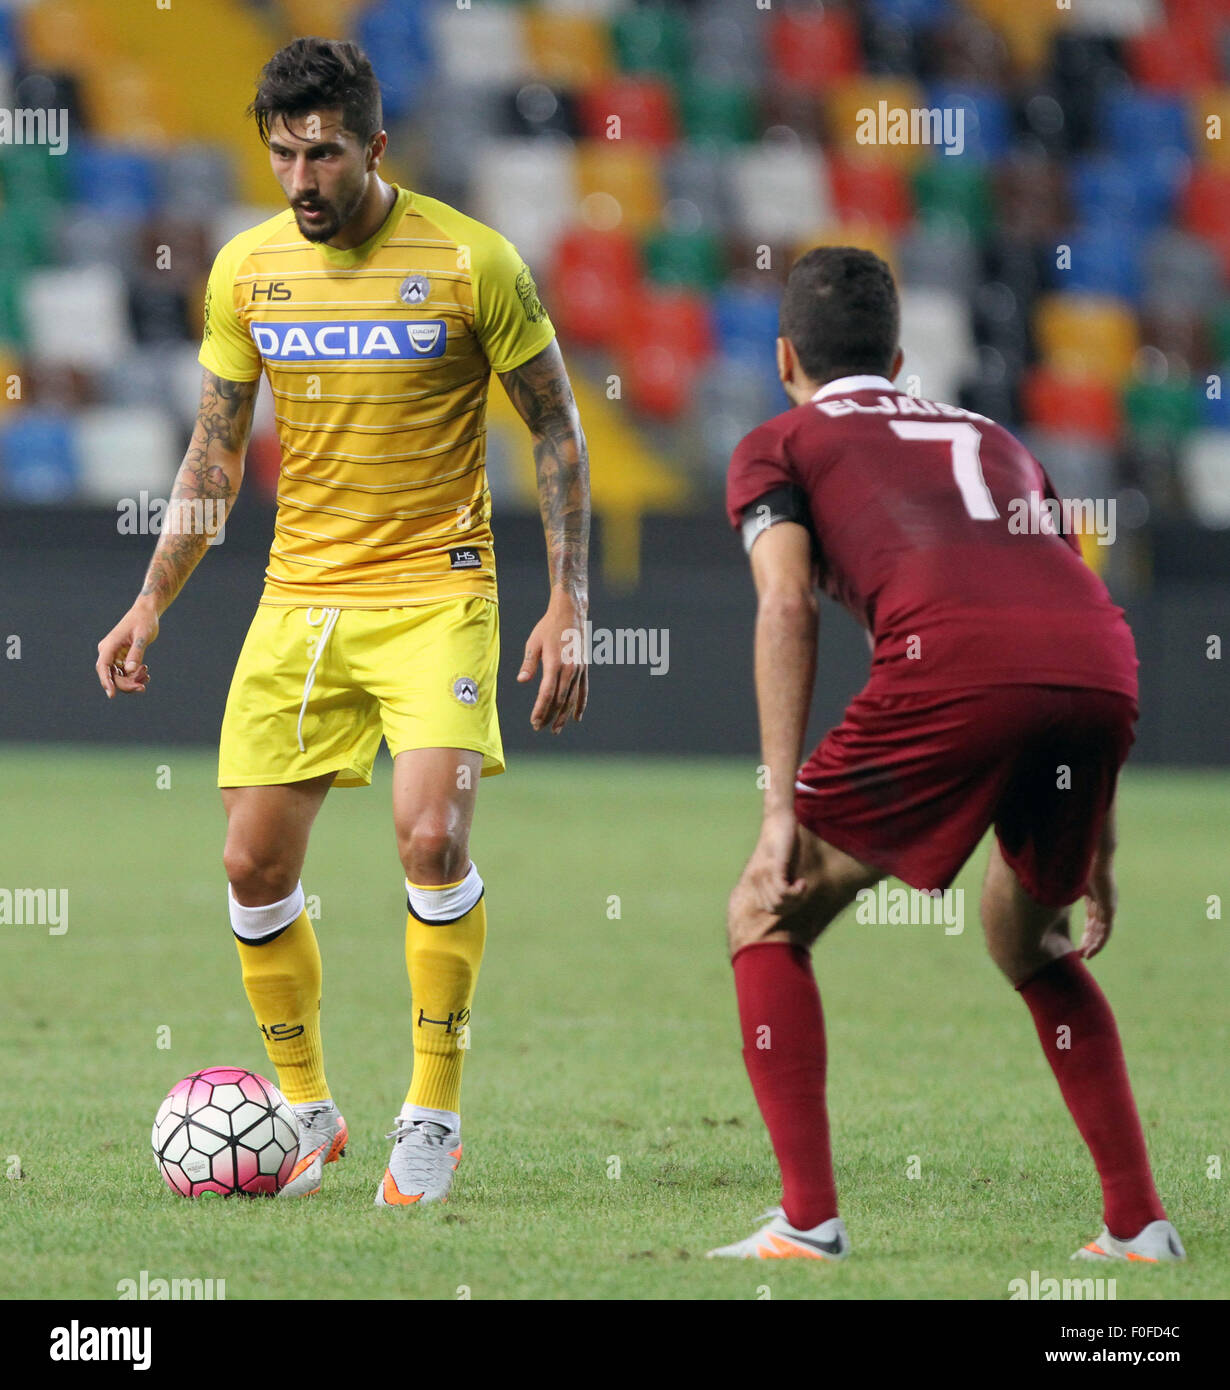 Udine, Italy. 13th August, 2015. Udinese's midfielder Panagiotis Giorgios Kone during the friendly pre-season football match Udinese Calcio v El-Jaish Sports Club on 13th August, 2015 at Friuli Stadium in Udine, Italy. Credit:  Andrea Spinelli/Alamy Live News Stock Photo